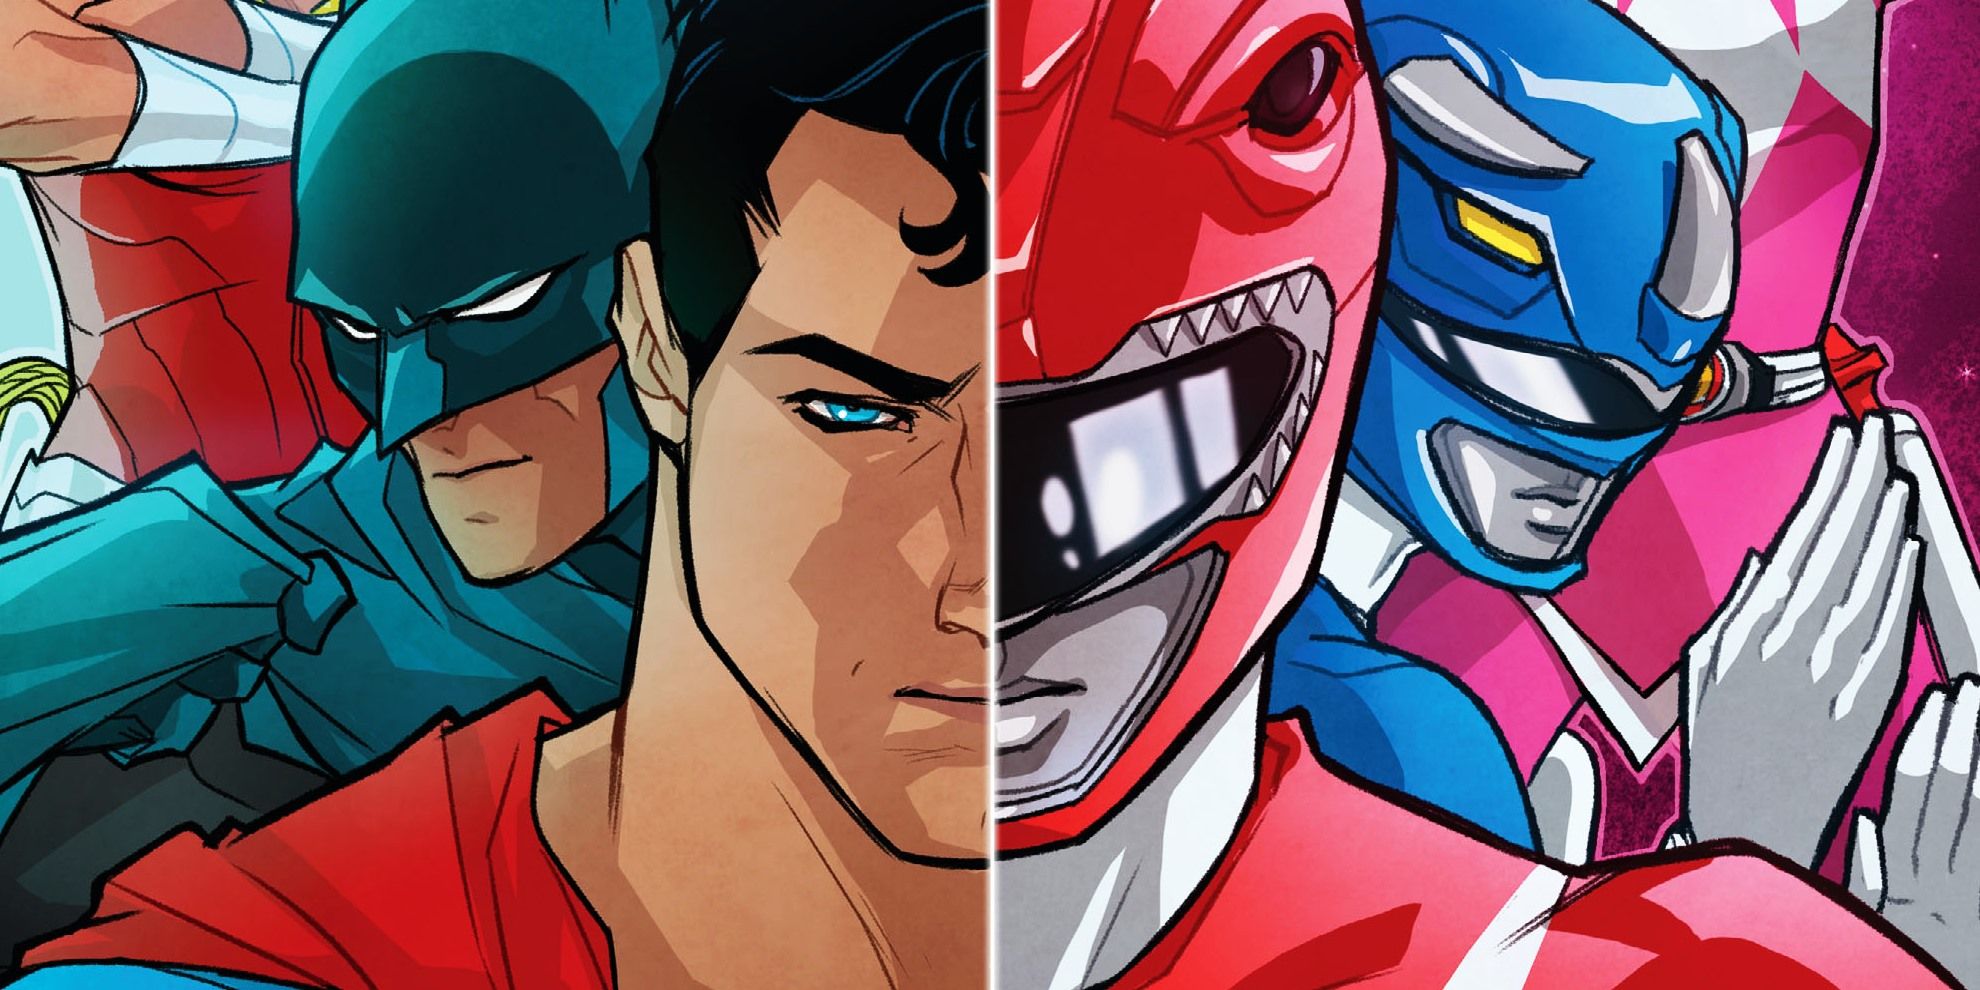  Comic Cover featuring split images of Justice League members and Power Rangers